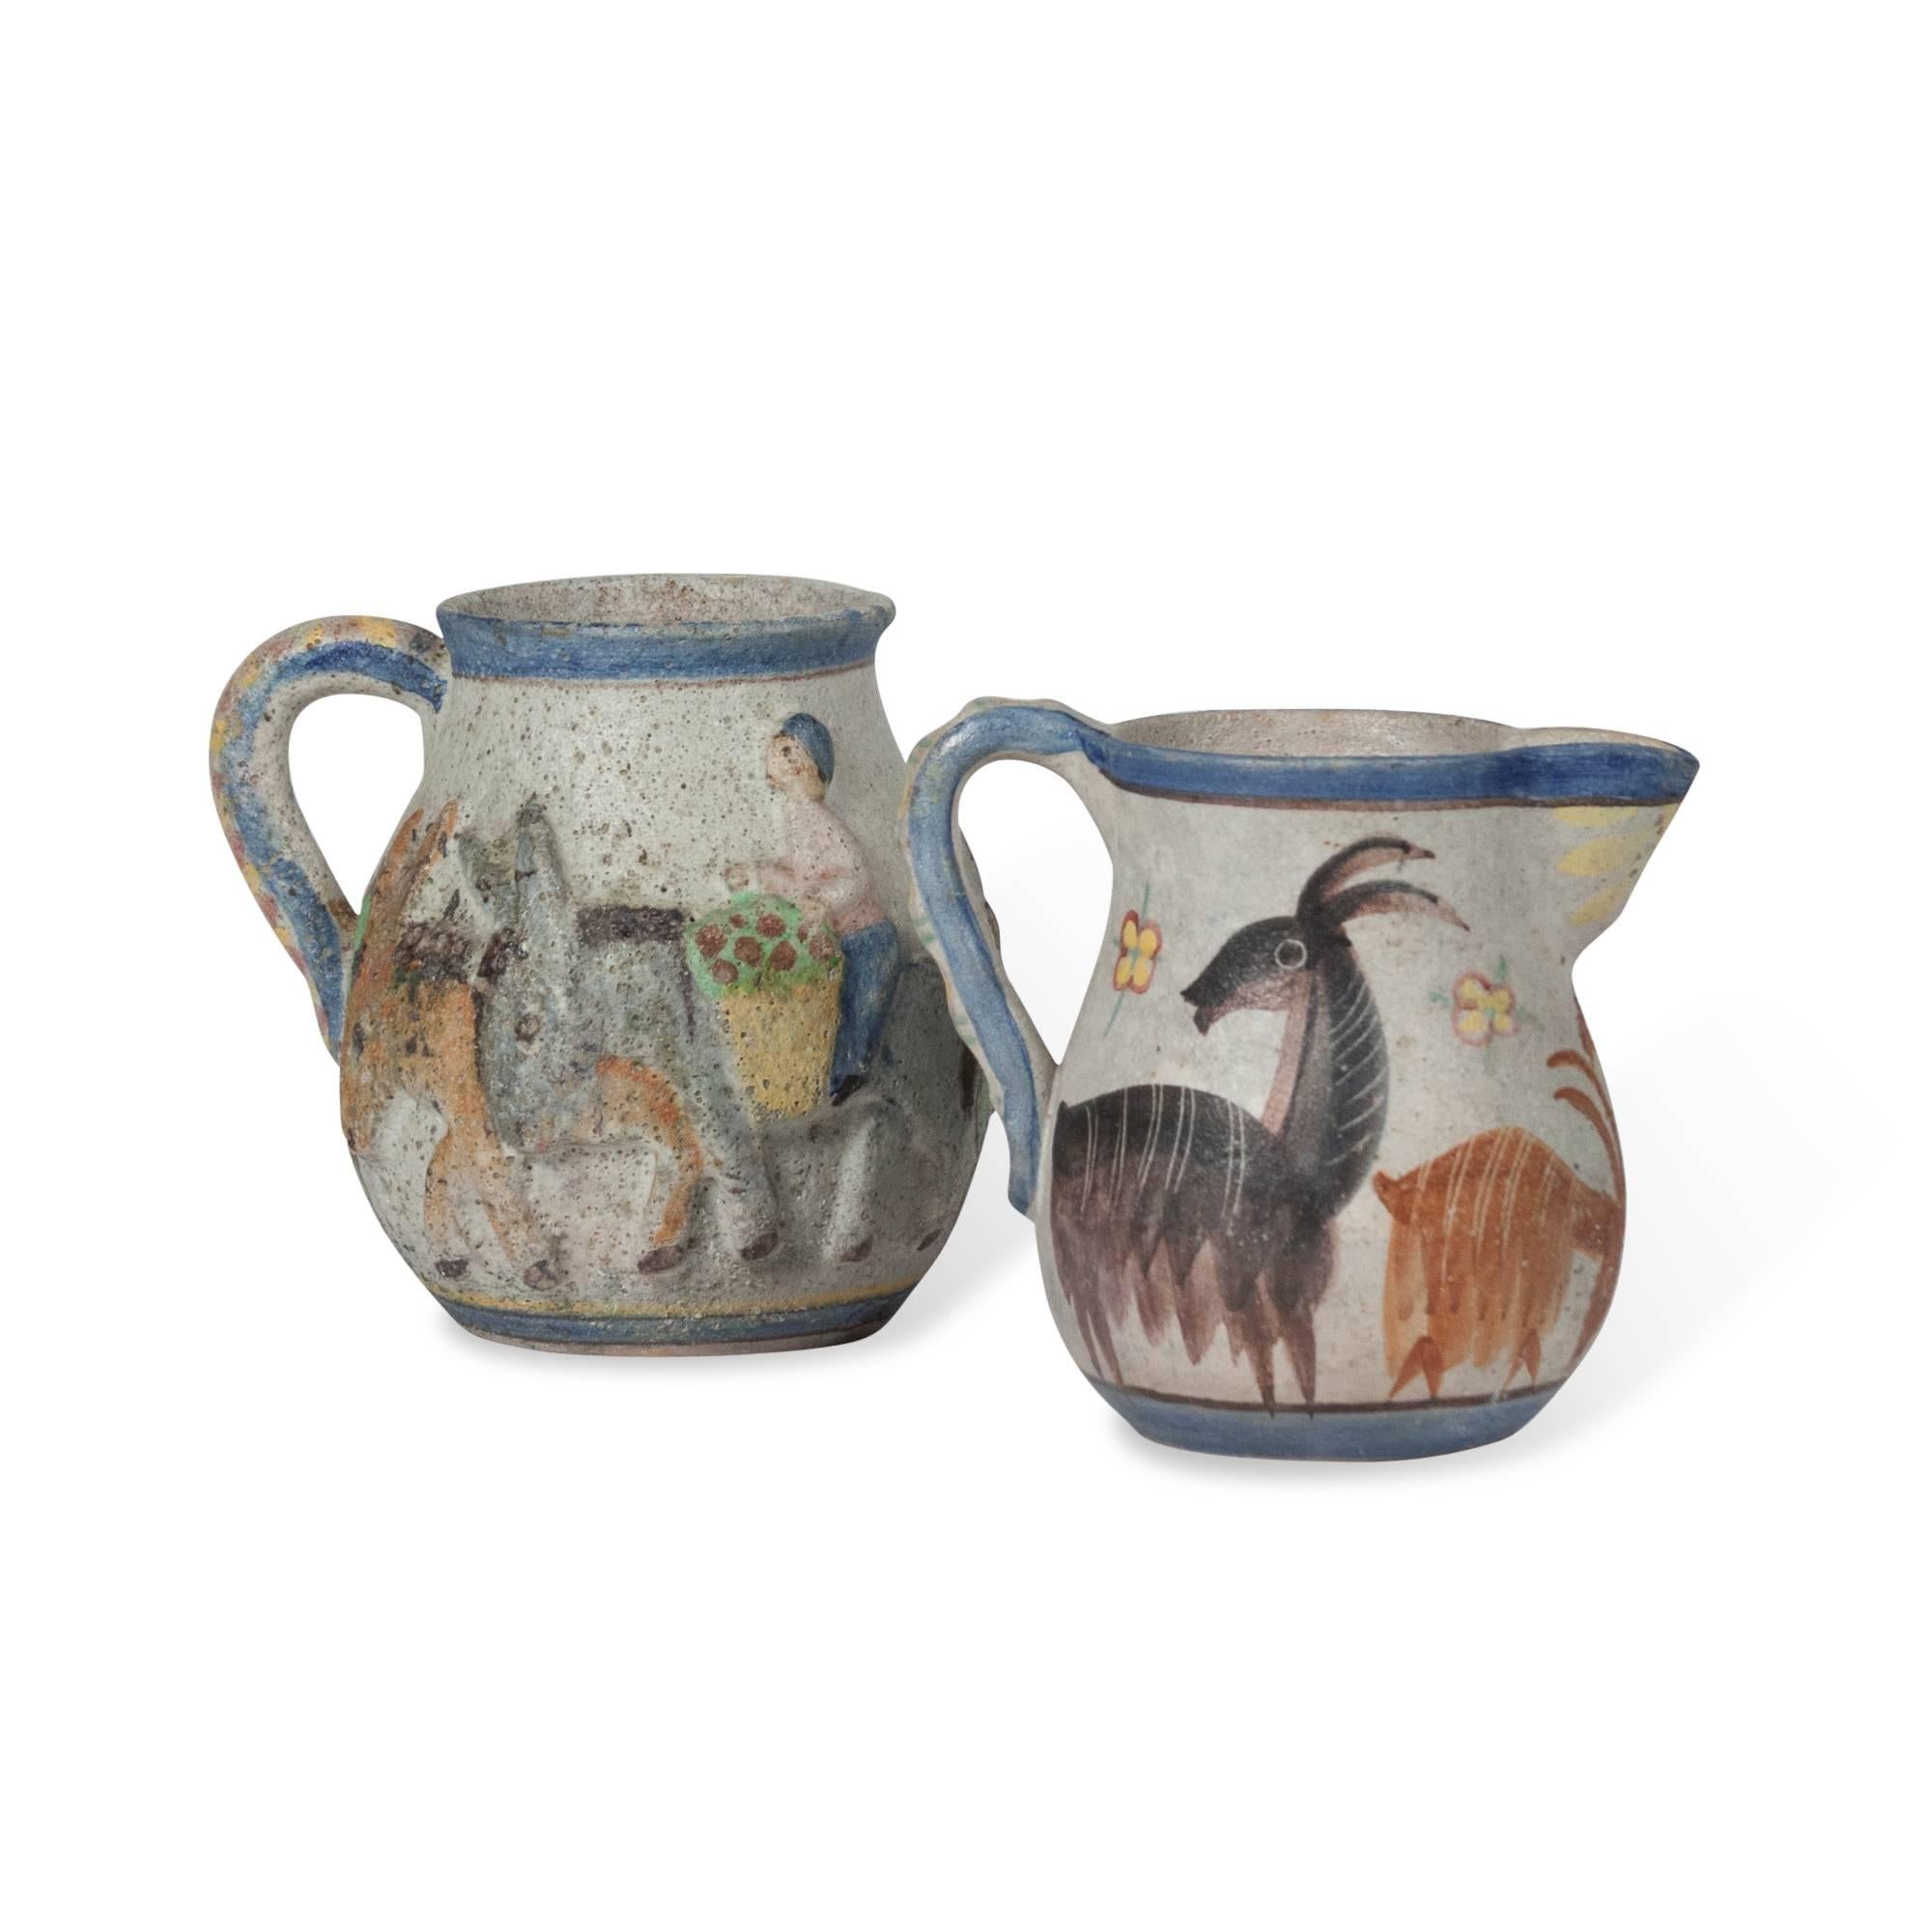 Two hand-painted ceramic pitchers by Guido Gambone, Italy, 1960s. Signed to the underside with his fish symbol. Measures: On left: 7.5 in W, 7.5 in H. On right: 7.25 in W, 7.25 in H. 
Price for the set of two. Also available separately, please